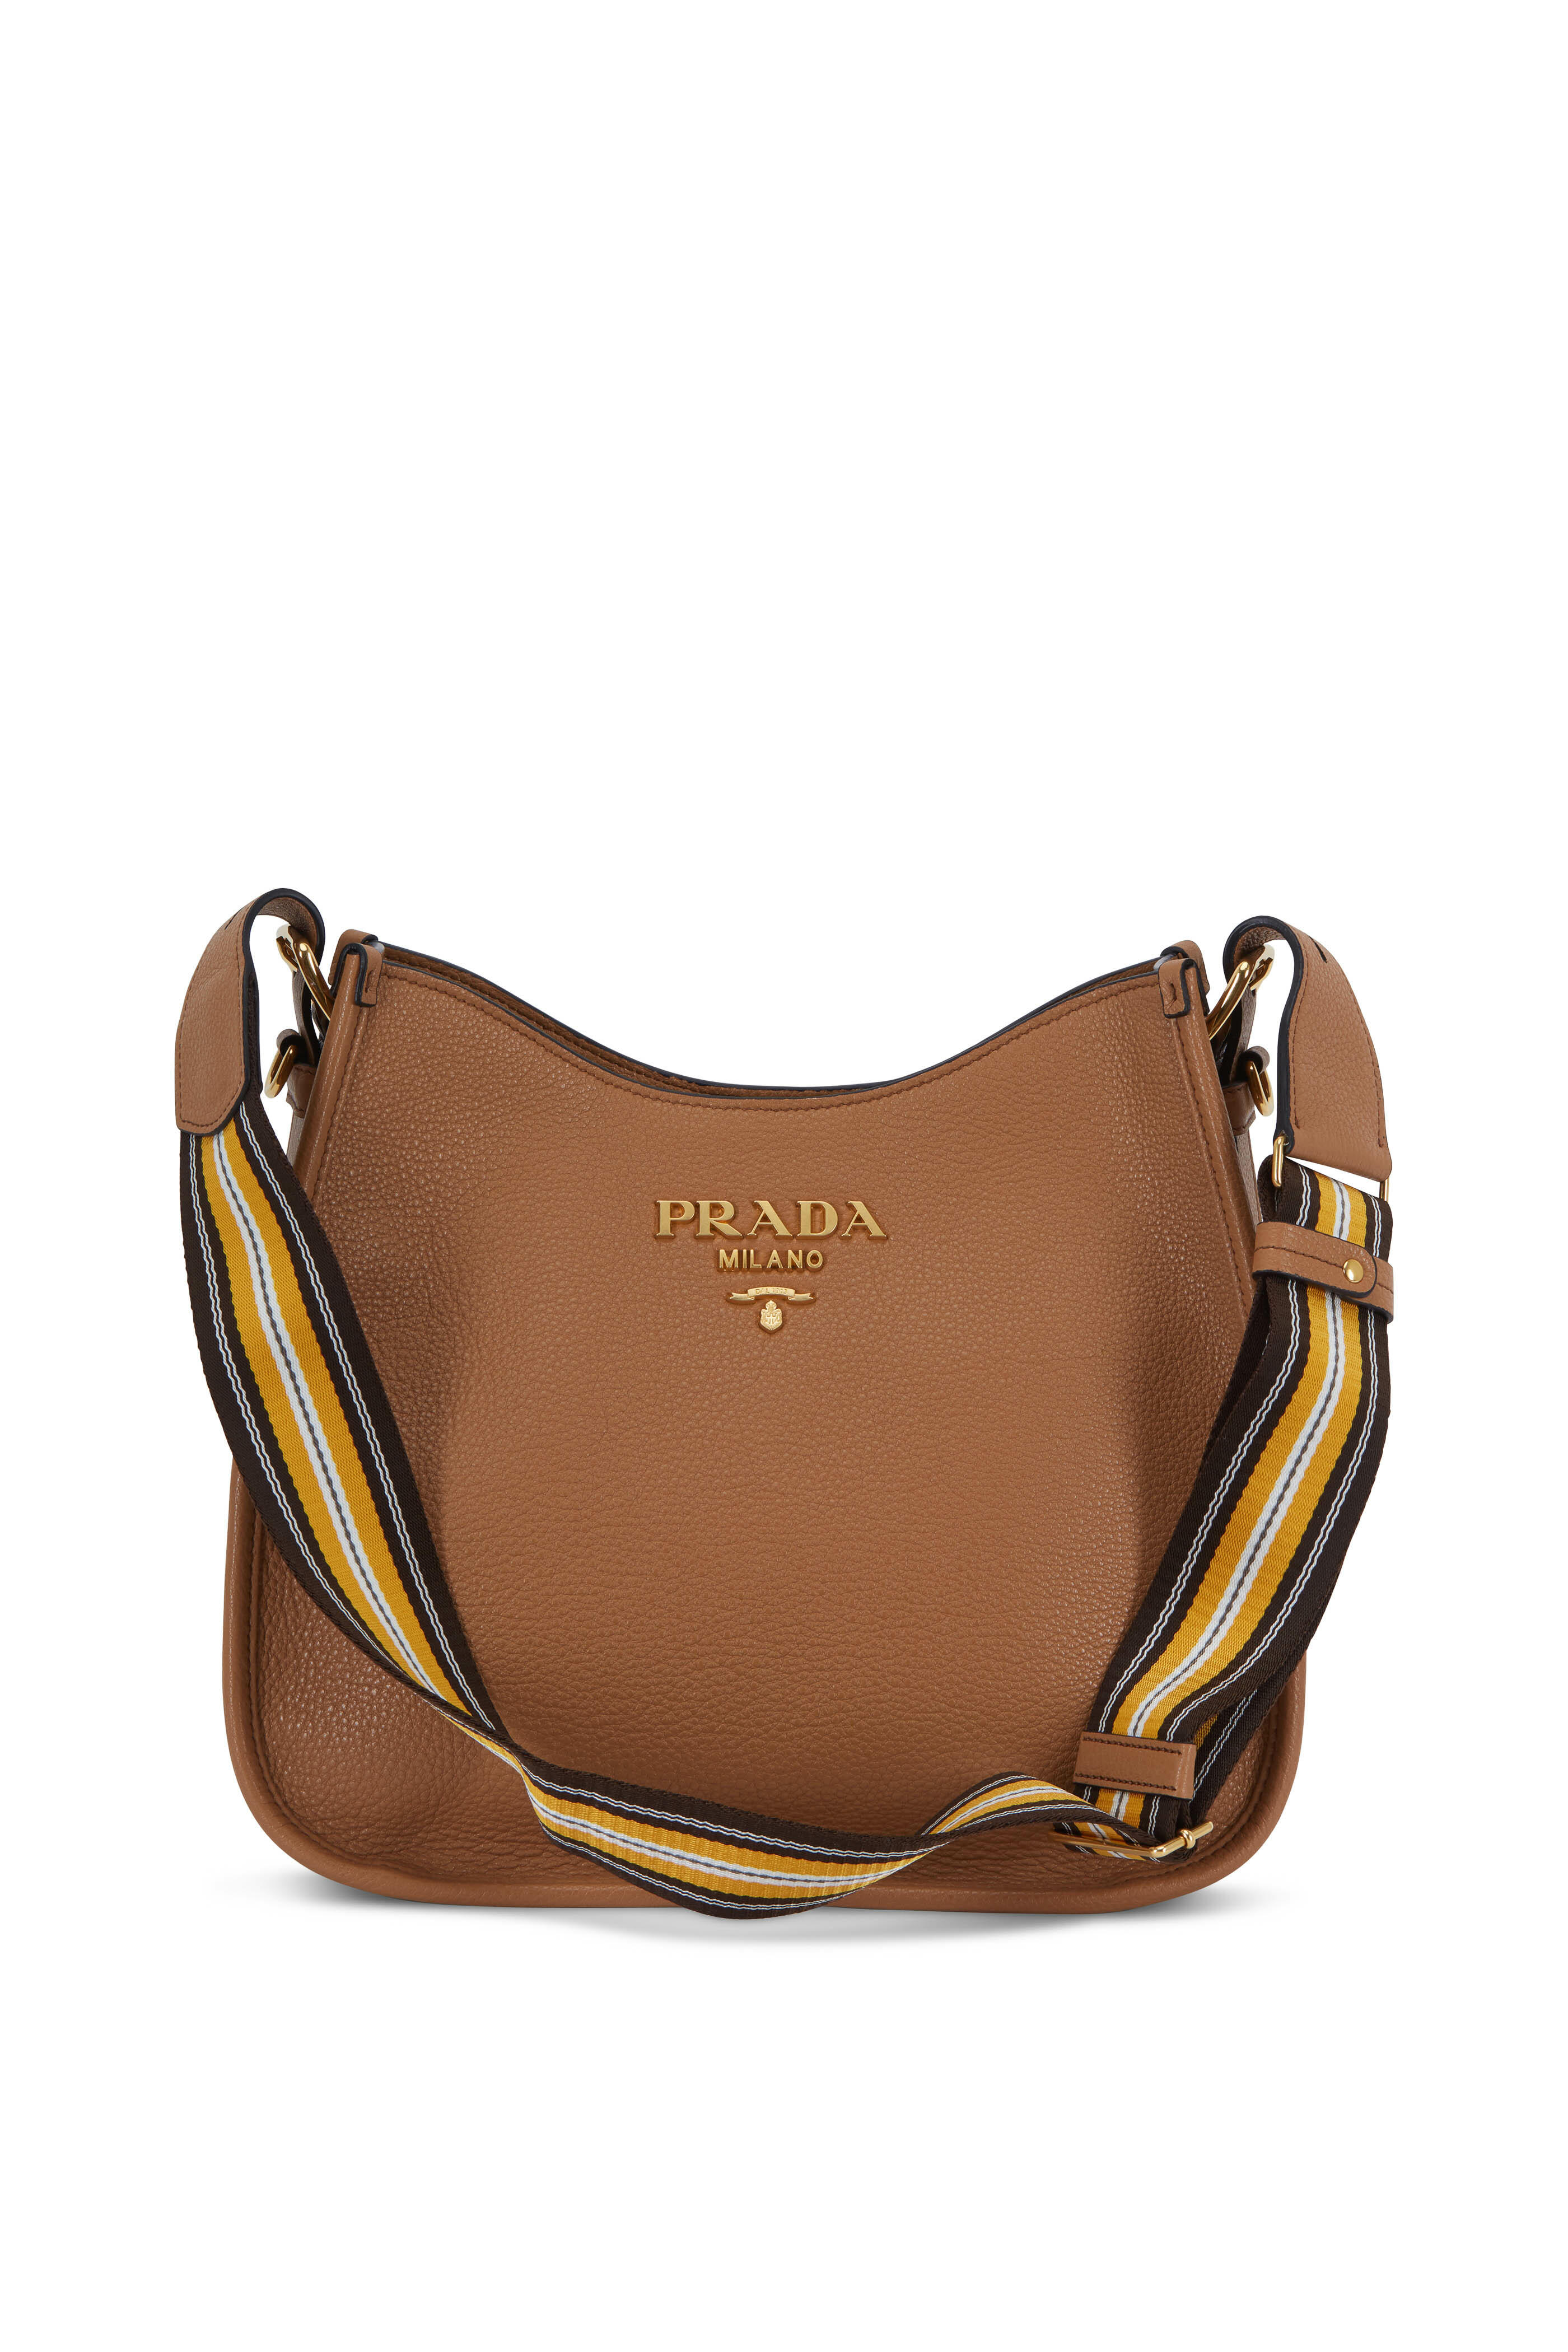 Prada Saffiano with shoulder strap and chain, Luxury, Bags & Wallets